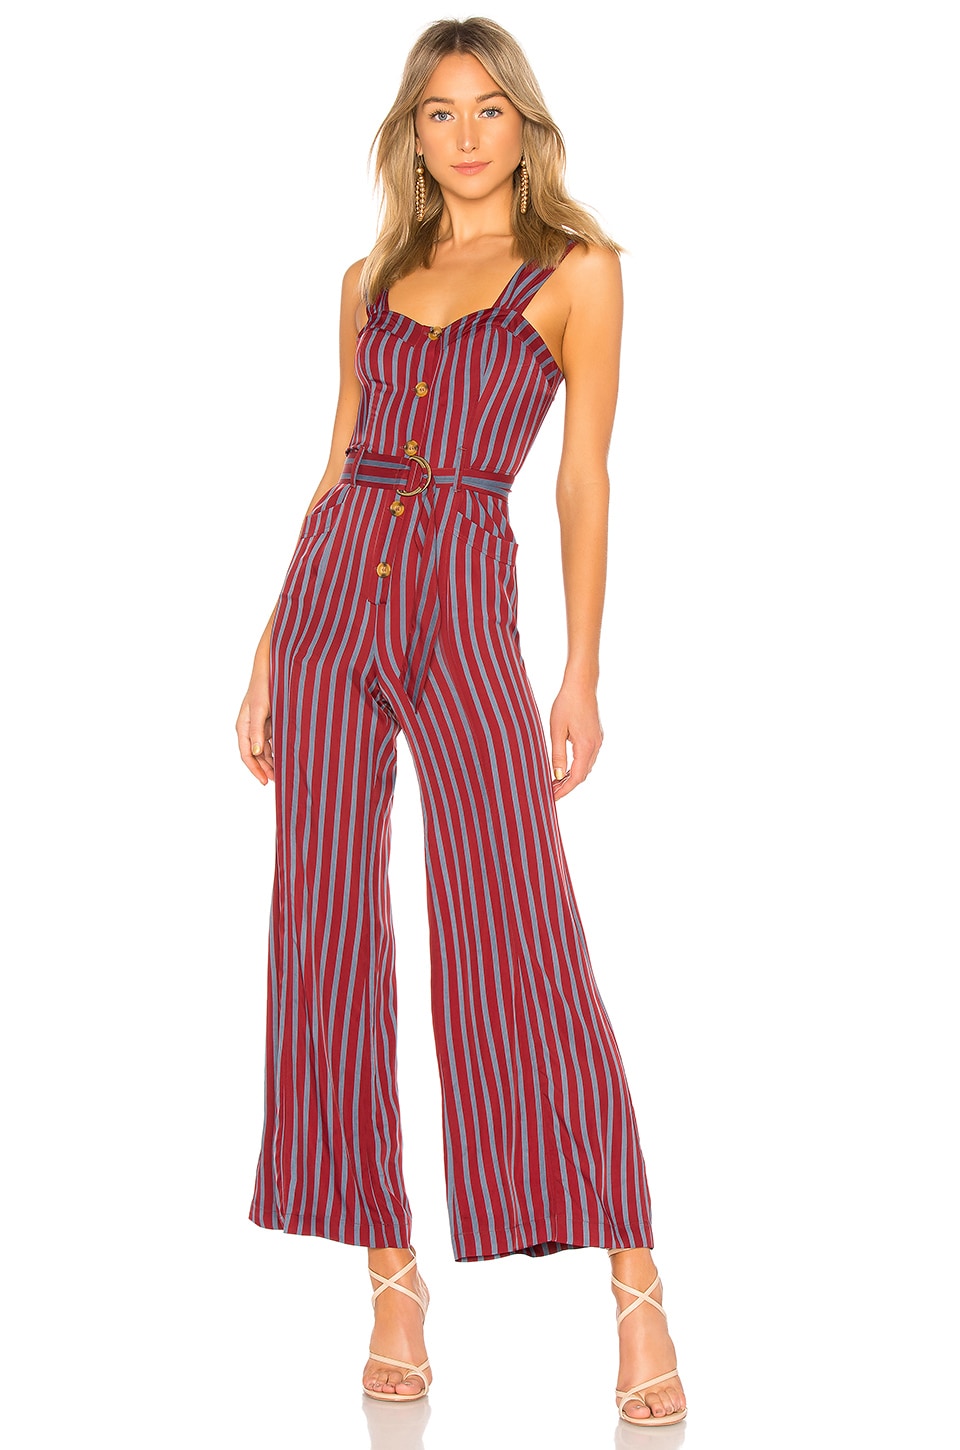 Free People City Girl Jumpsuit in Wine | REVOLVE